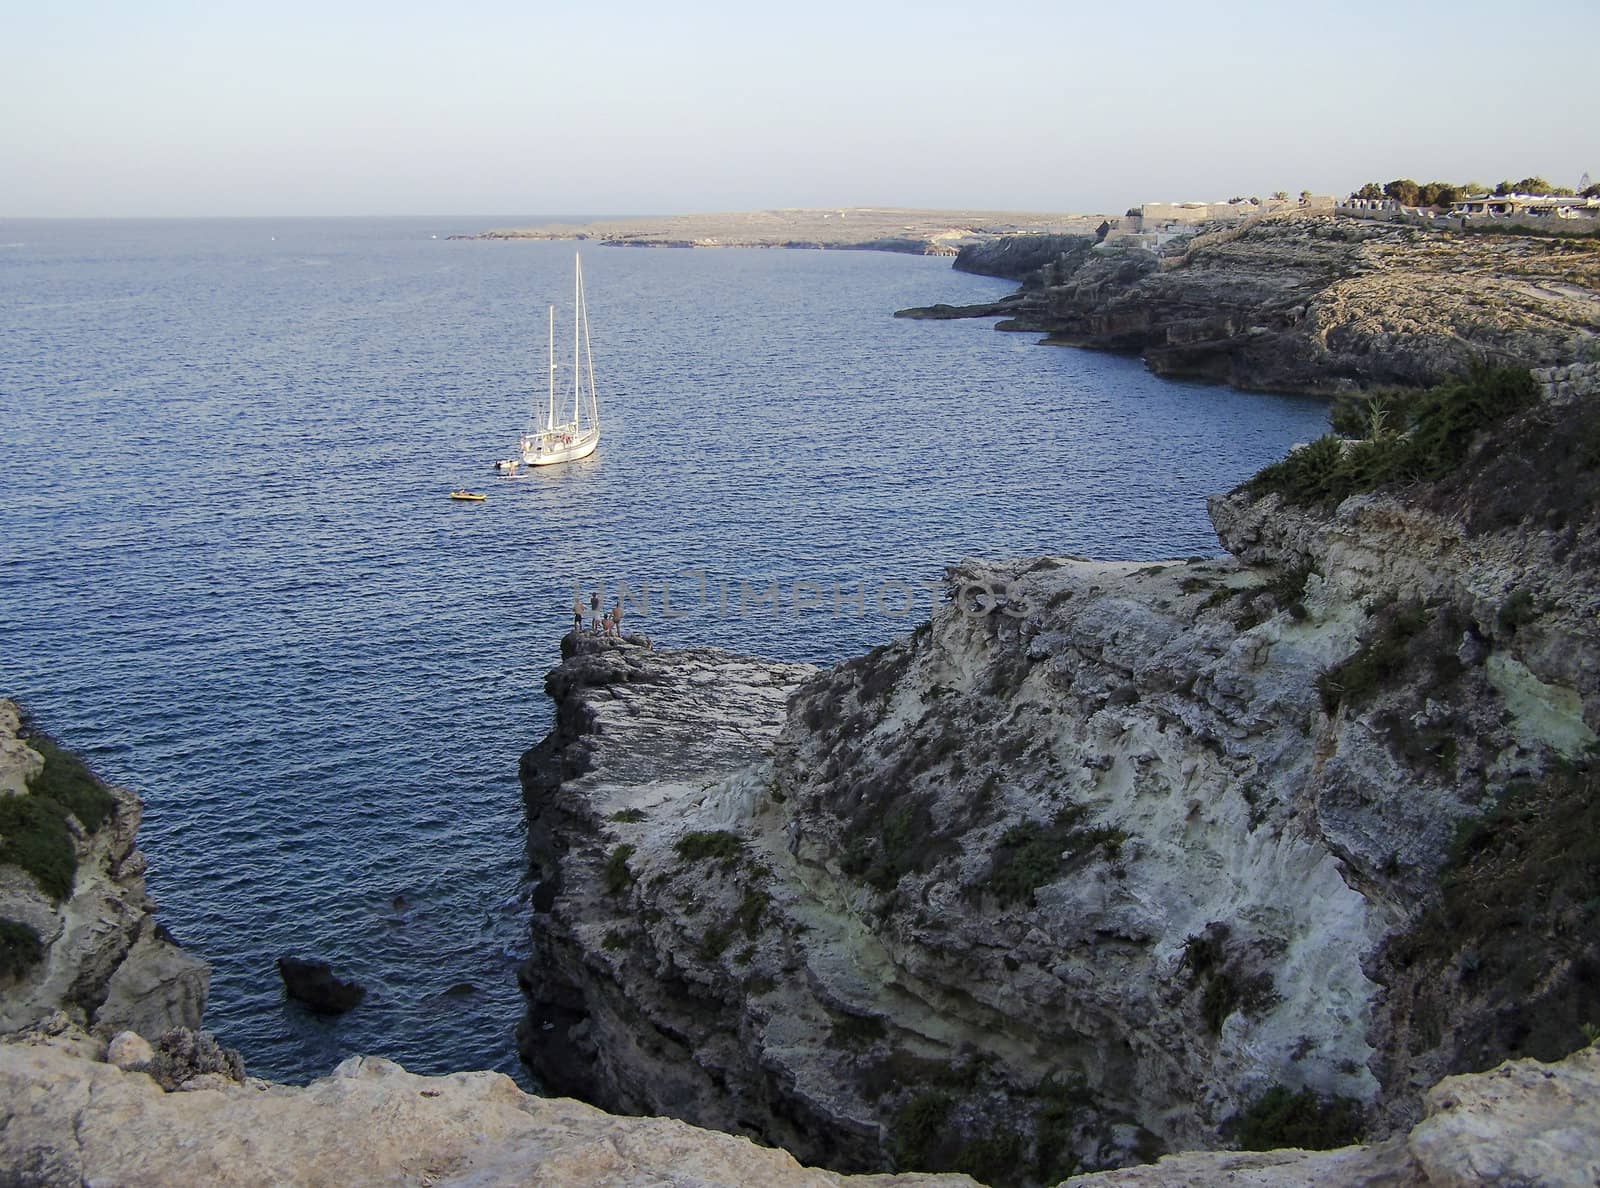 lampedusa cove with fishing and boat in the distance